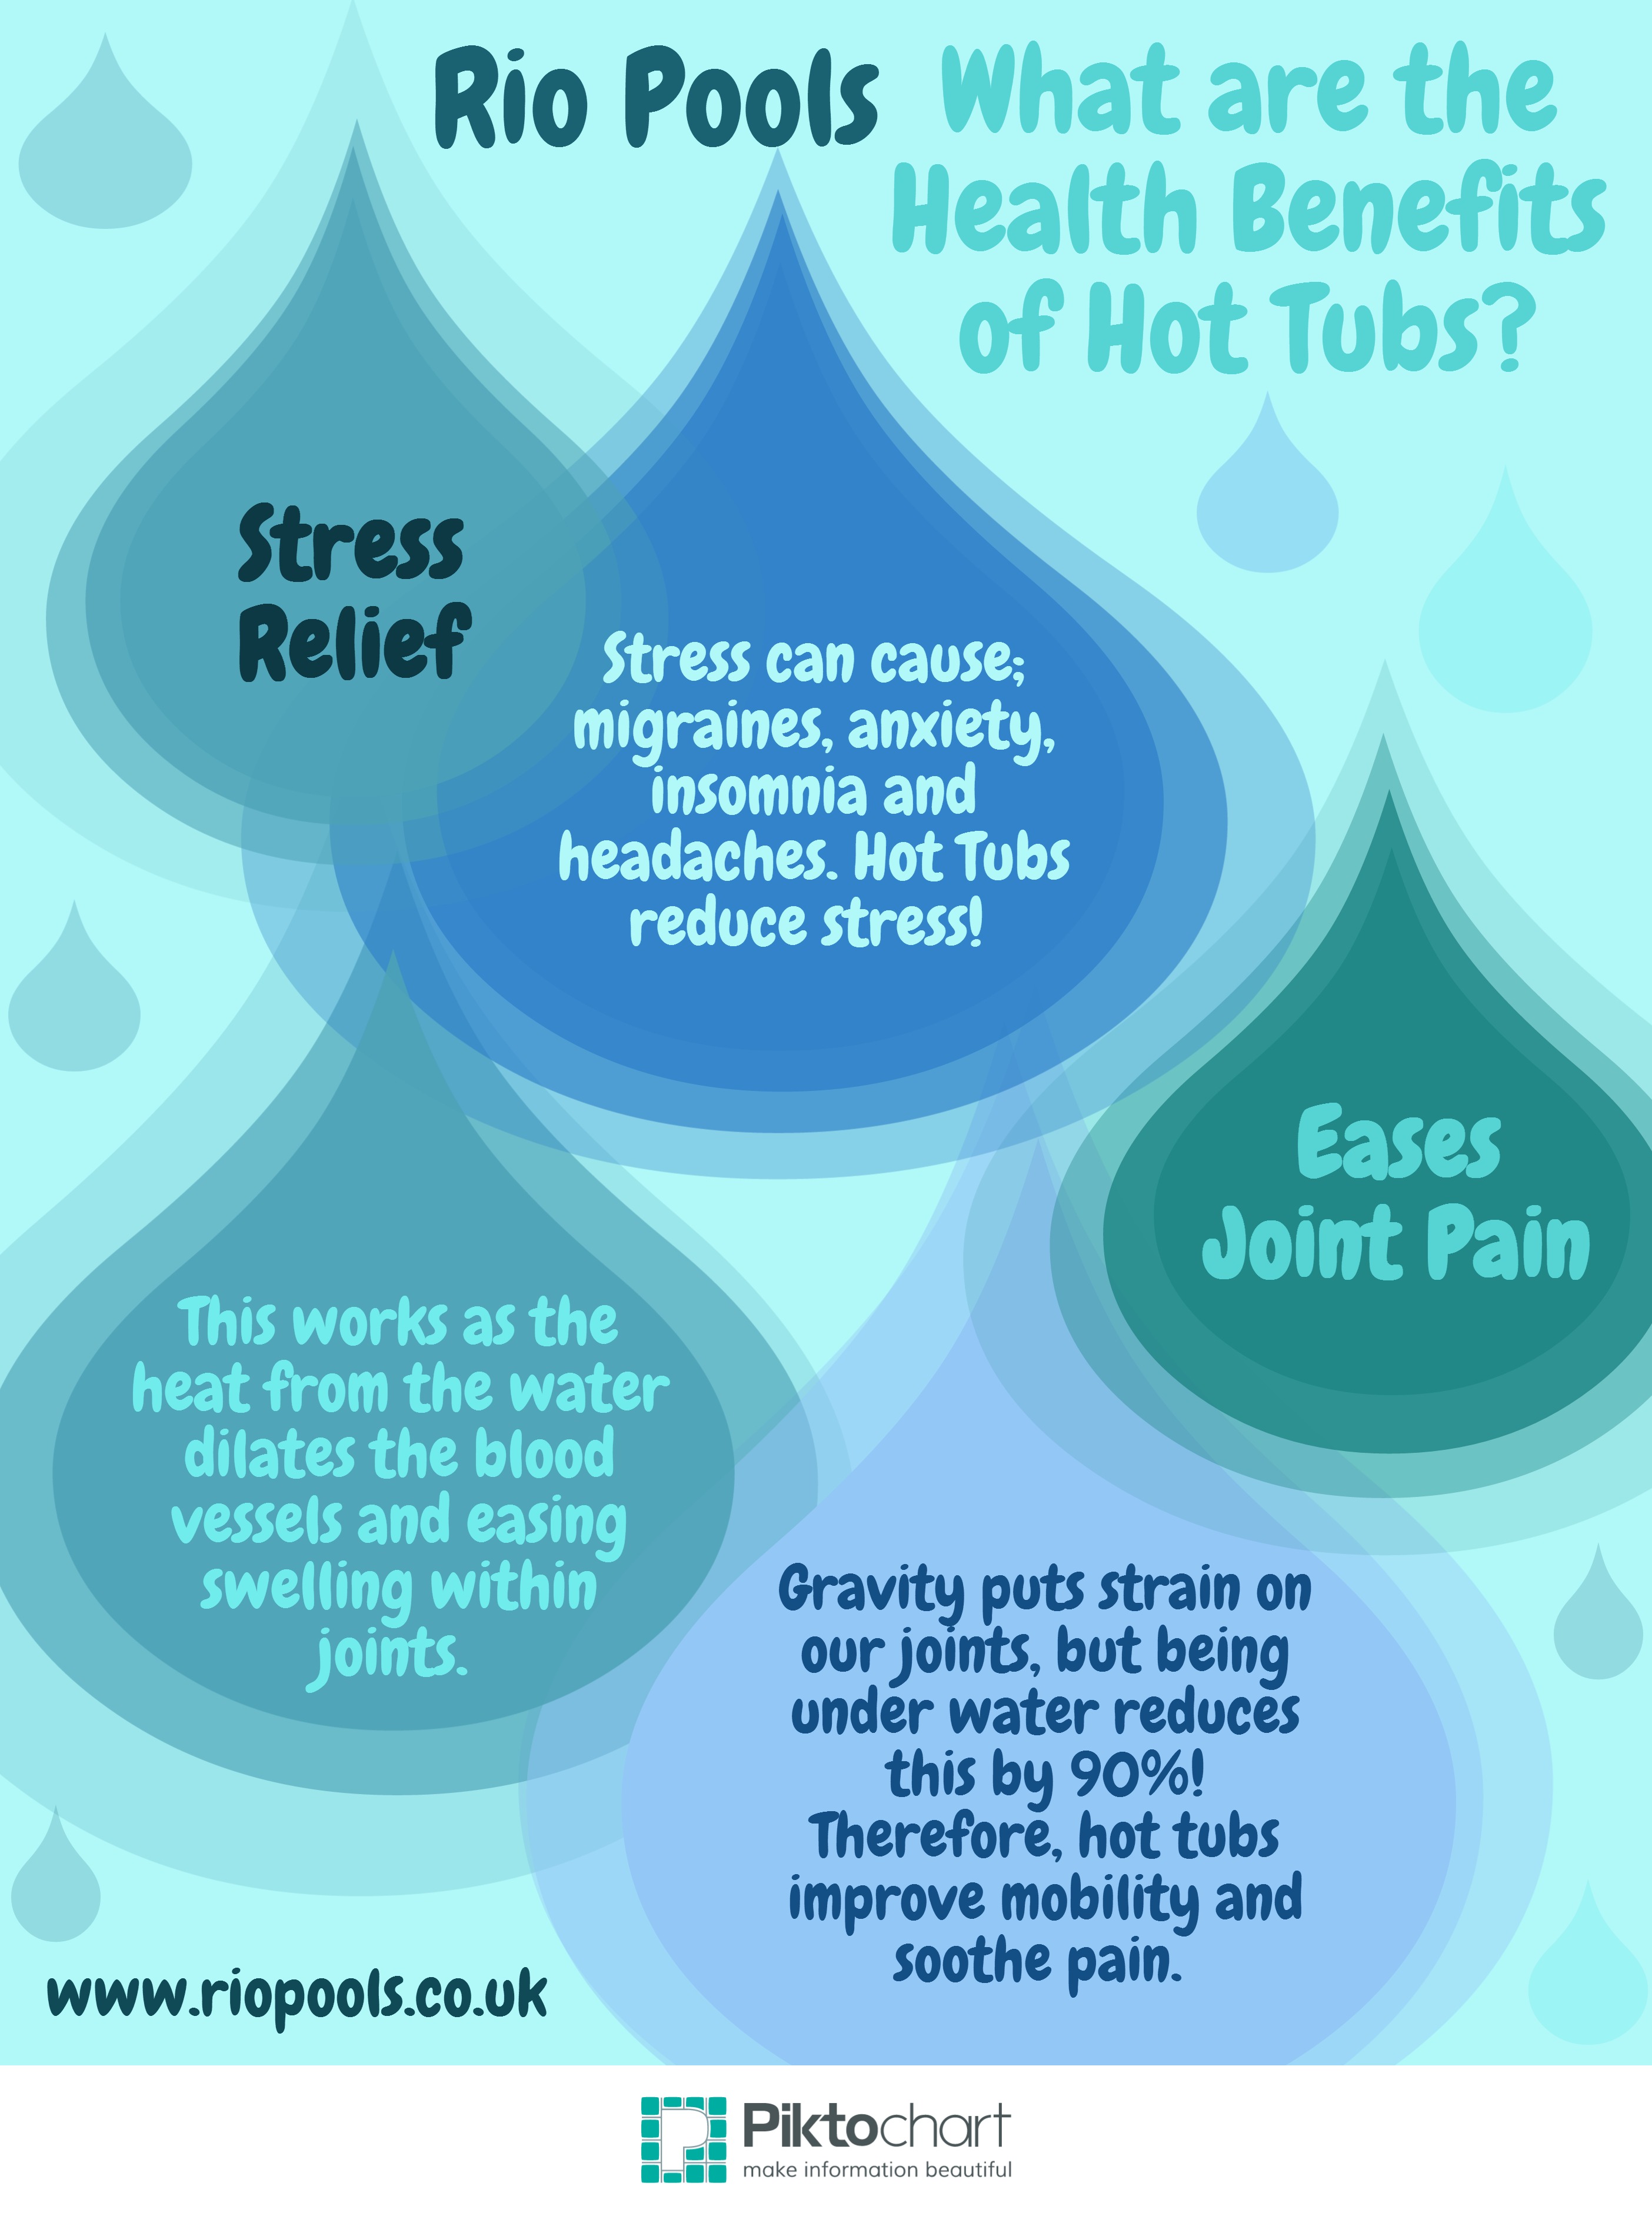 https://i.visual.ly/images/what-are-the-health-benefits-of-hot-tubs_536cf332baf97.jpg